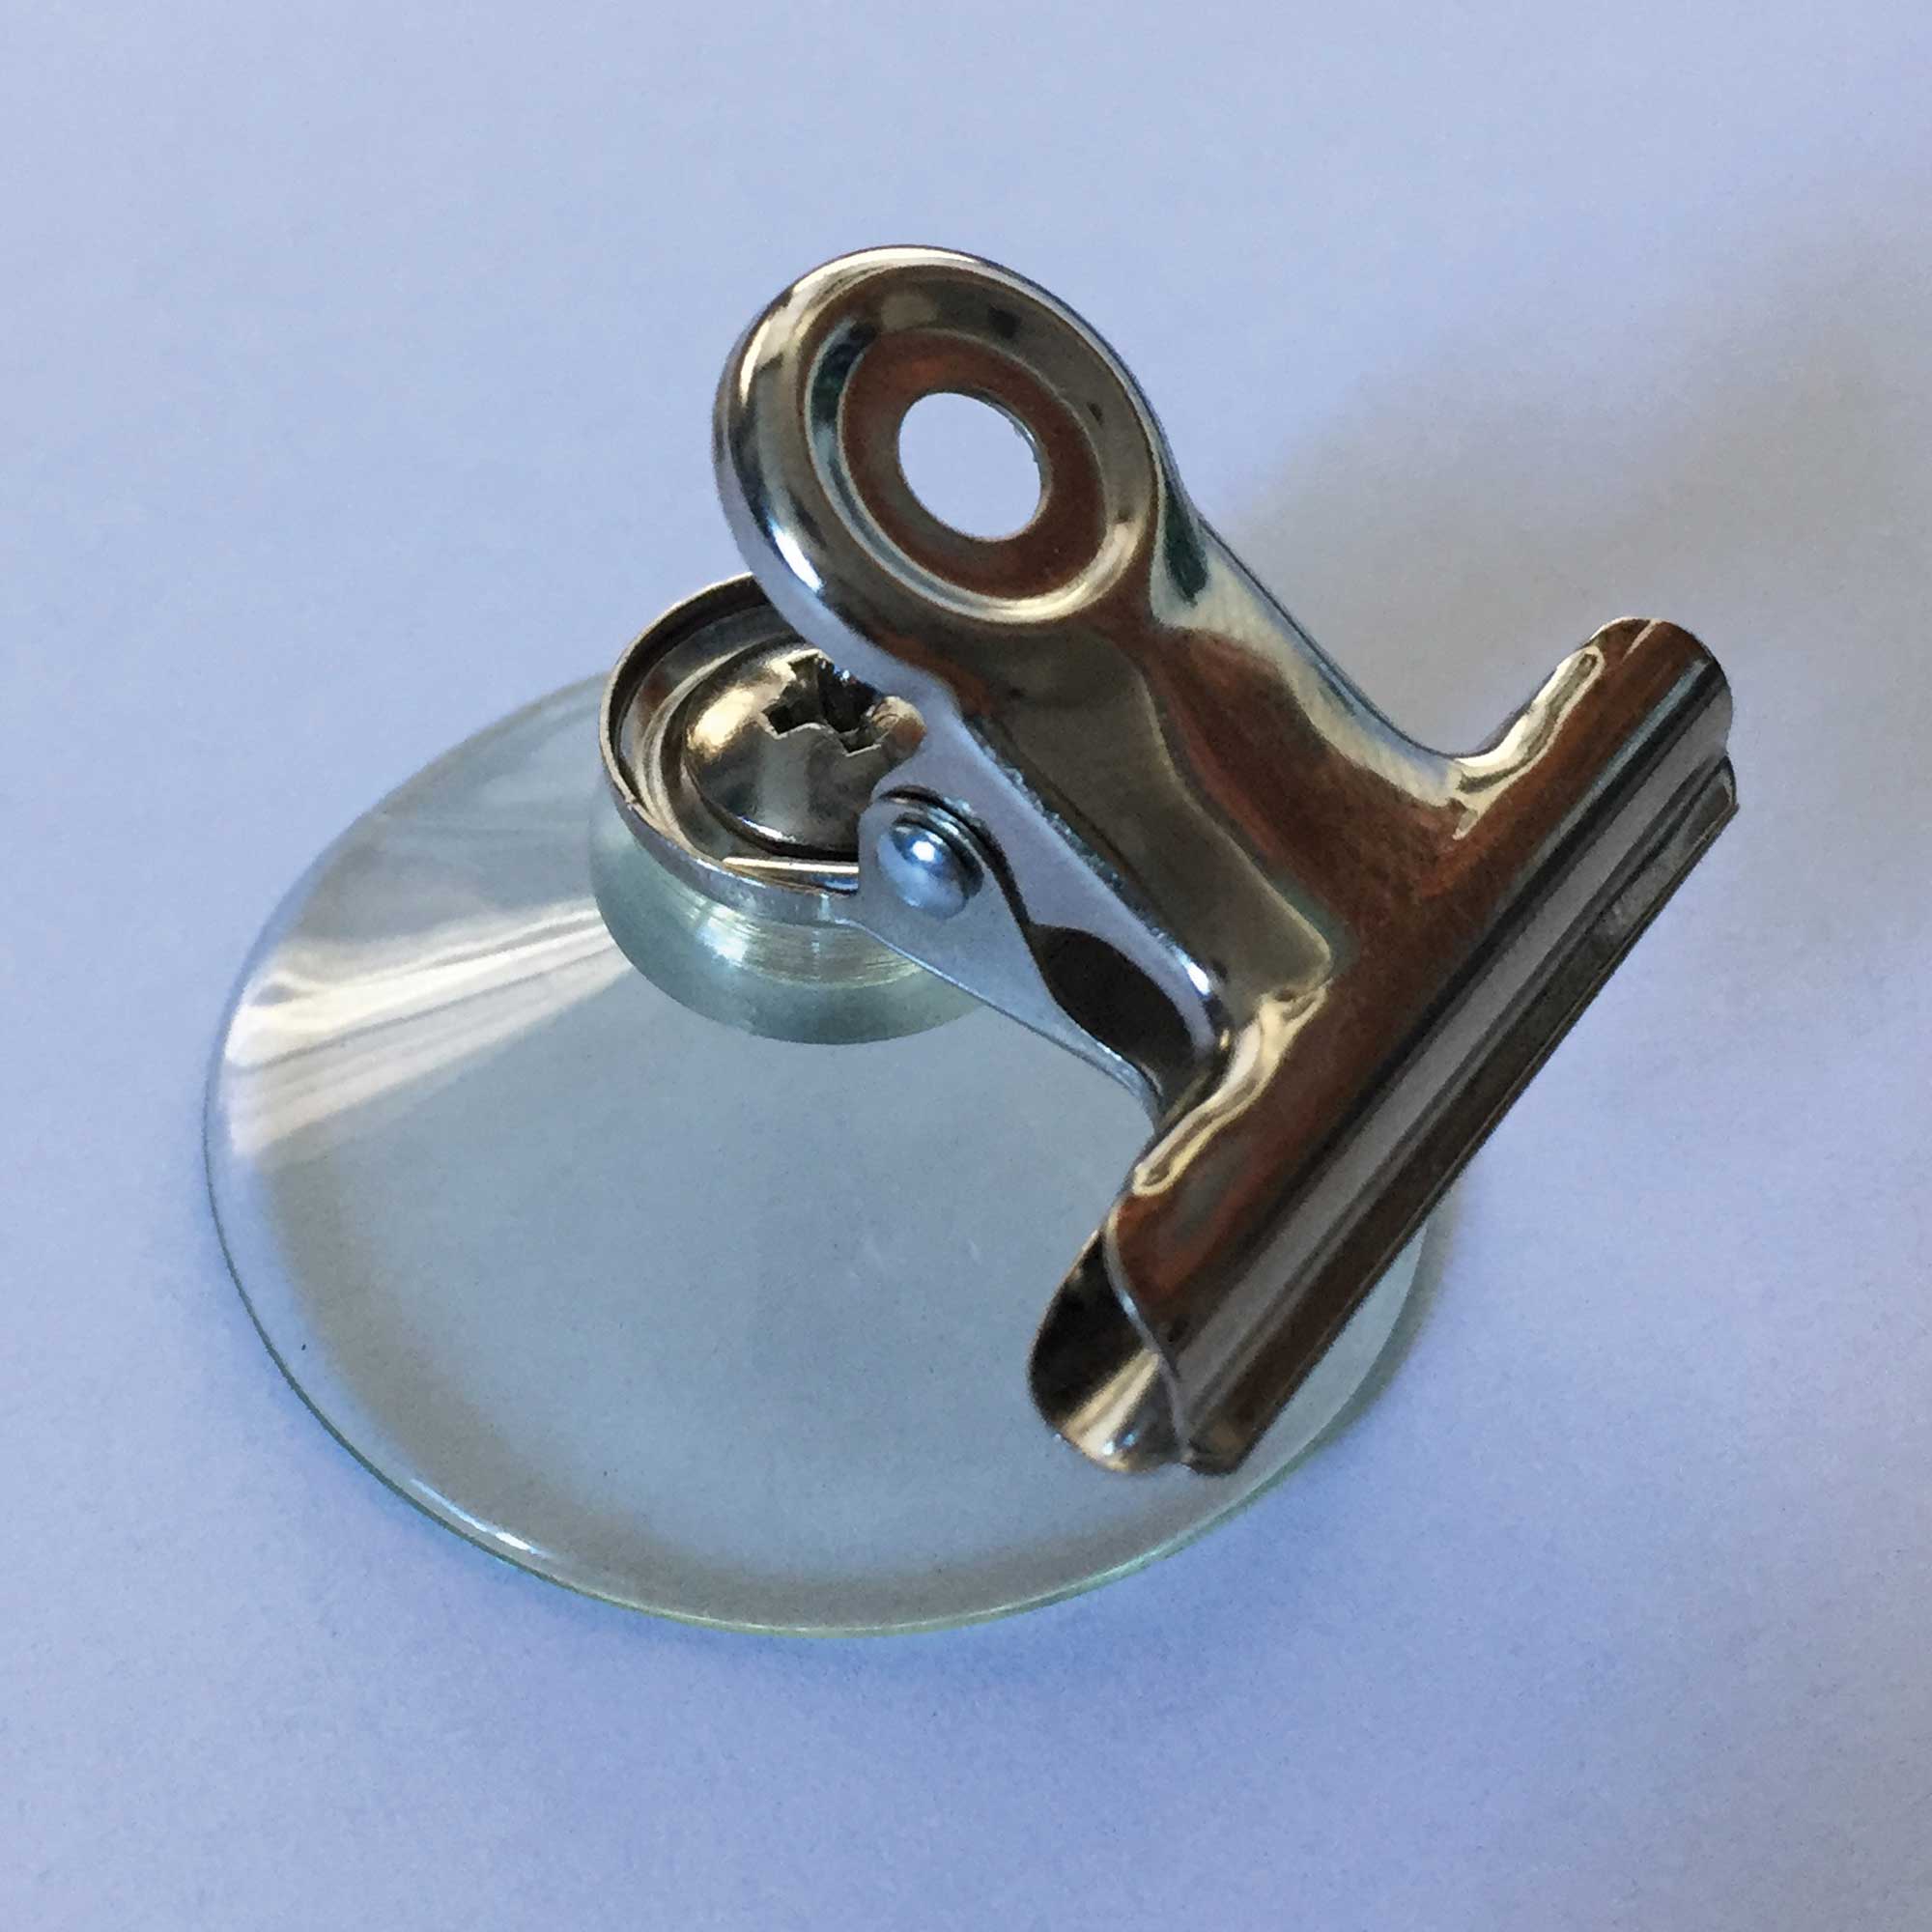 Suction cup with paper clip